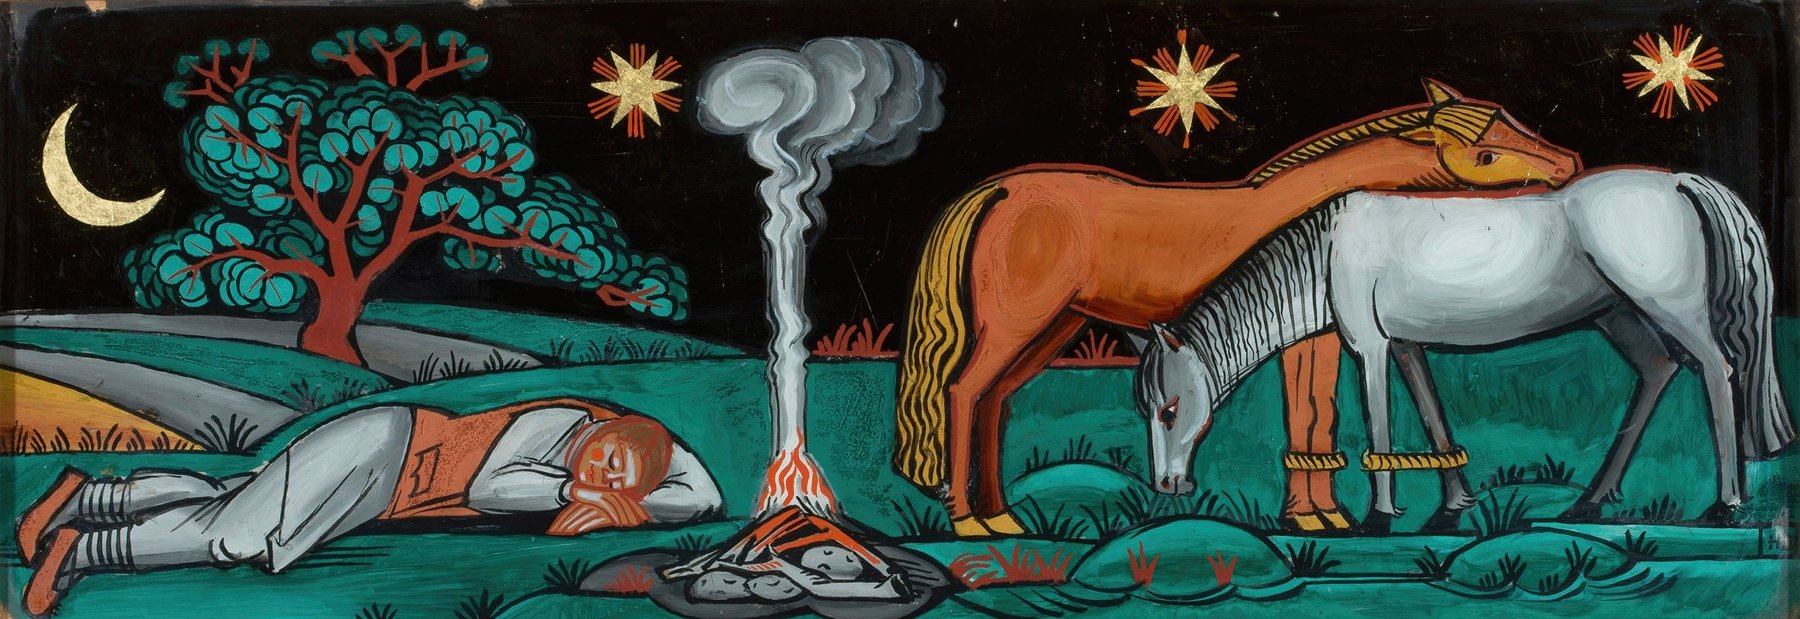 On a pasture (1932)